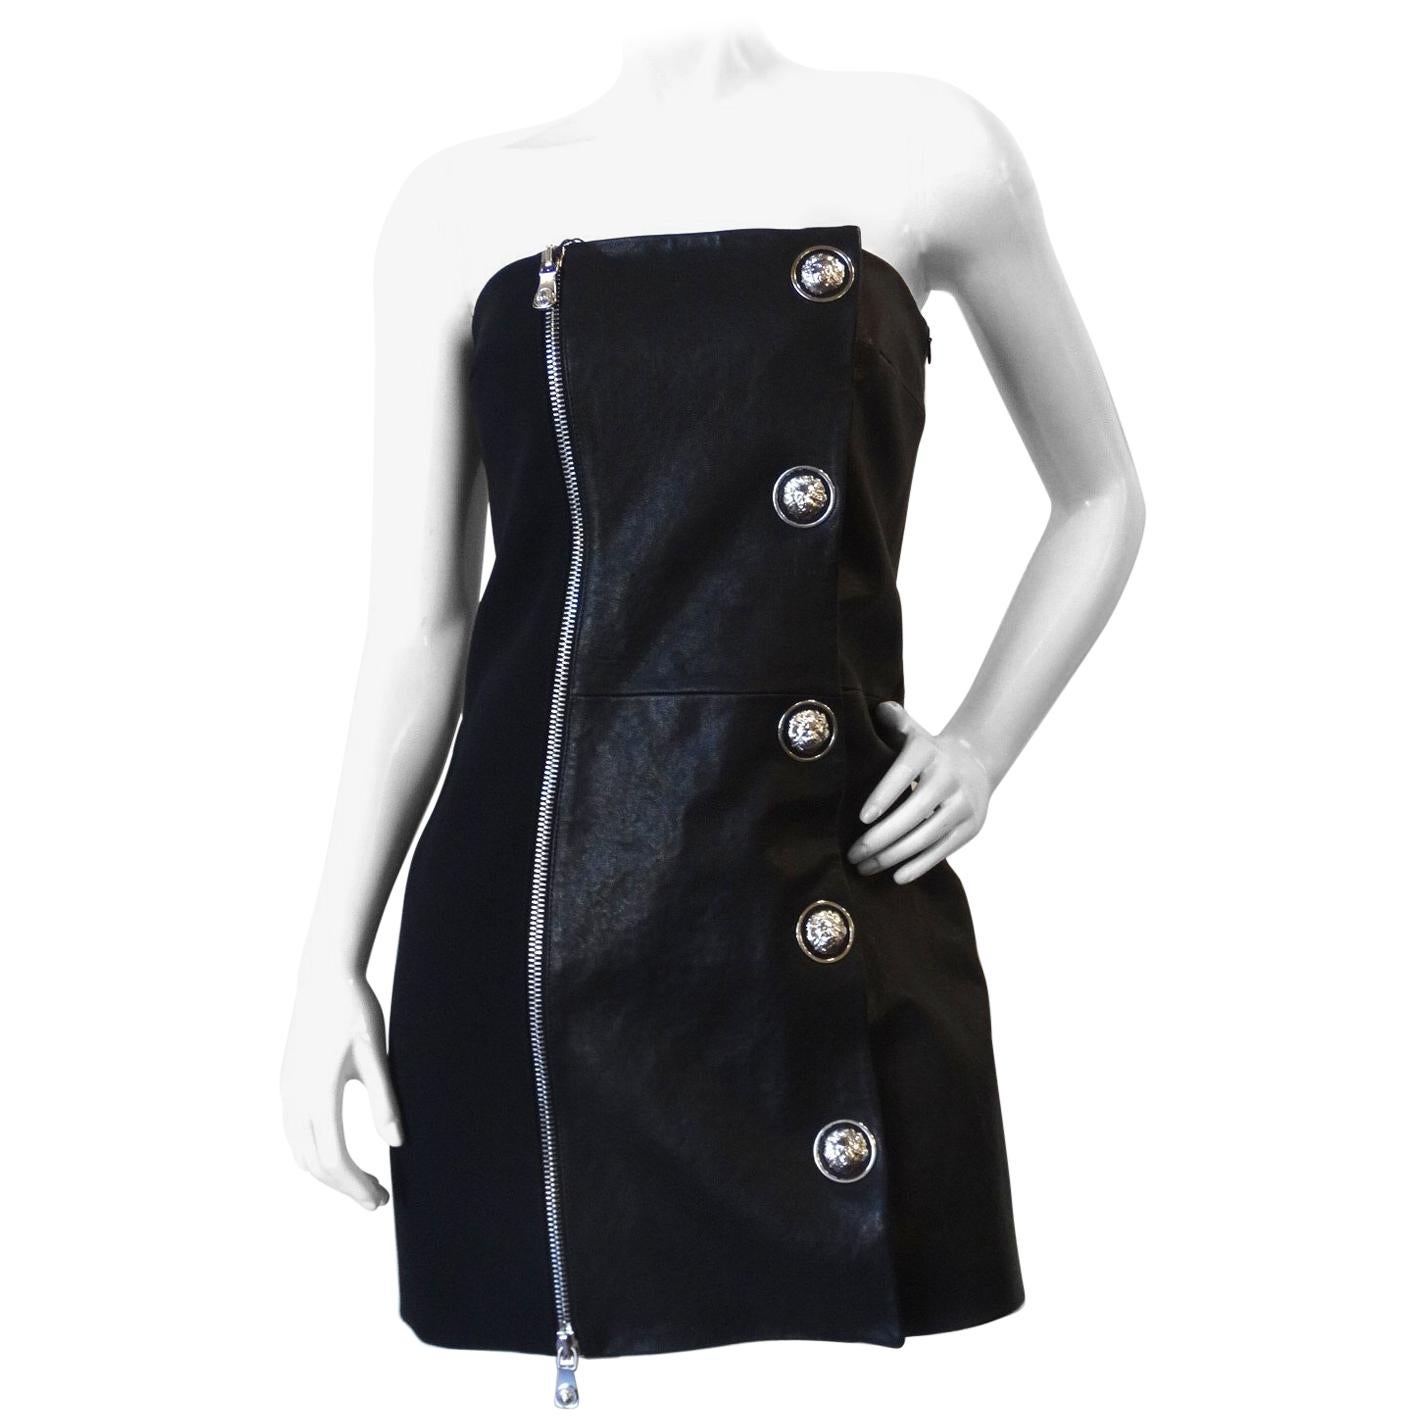 2000s Anthony Vaccarello for Versus Versace Strapless Dress For Sale